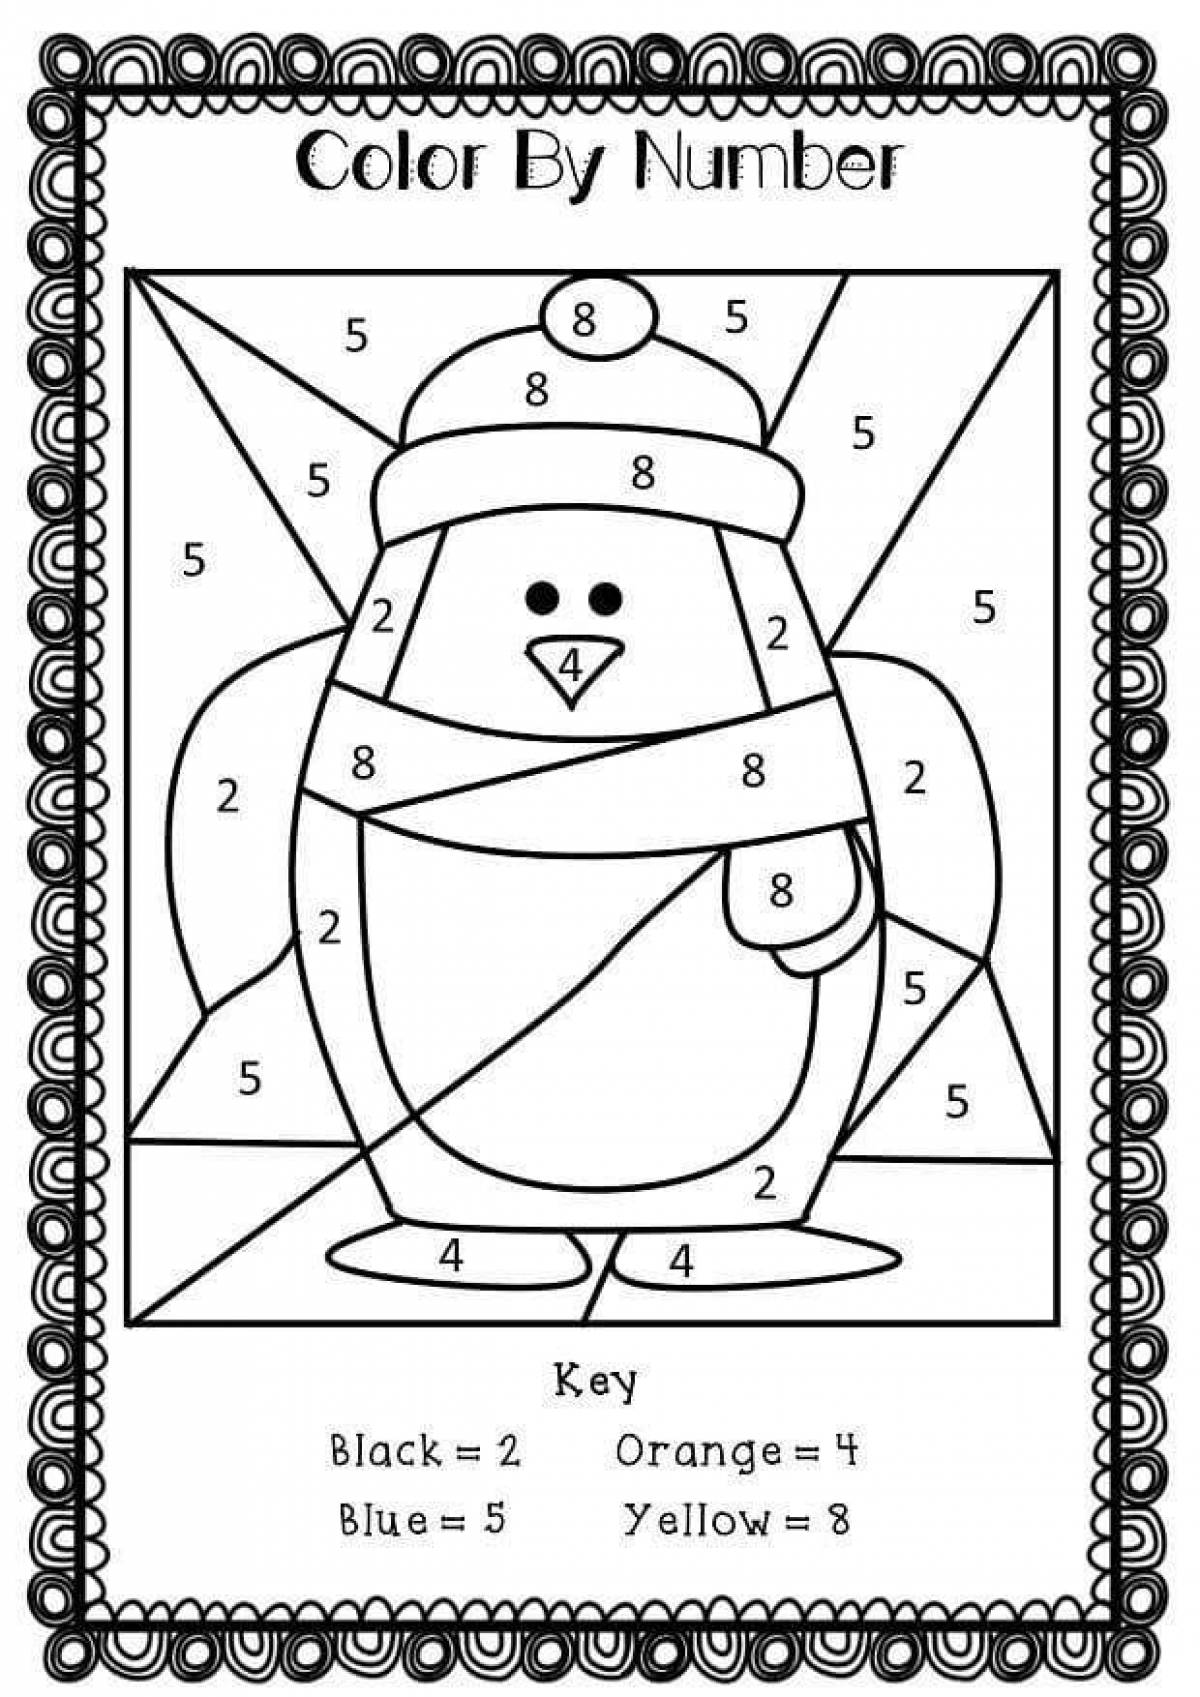 Fascinating snowman coloring by numbers